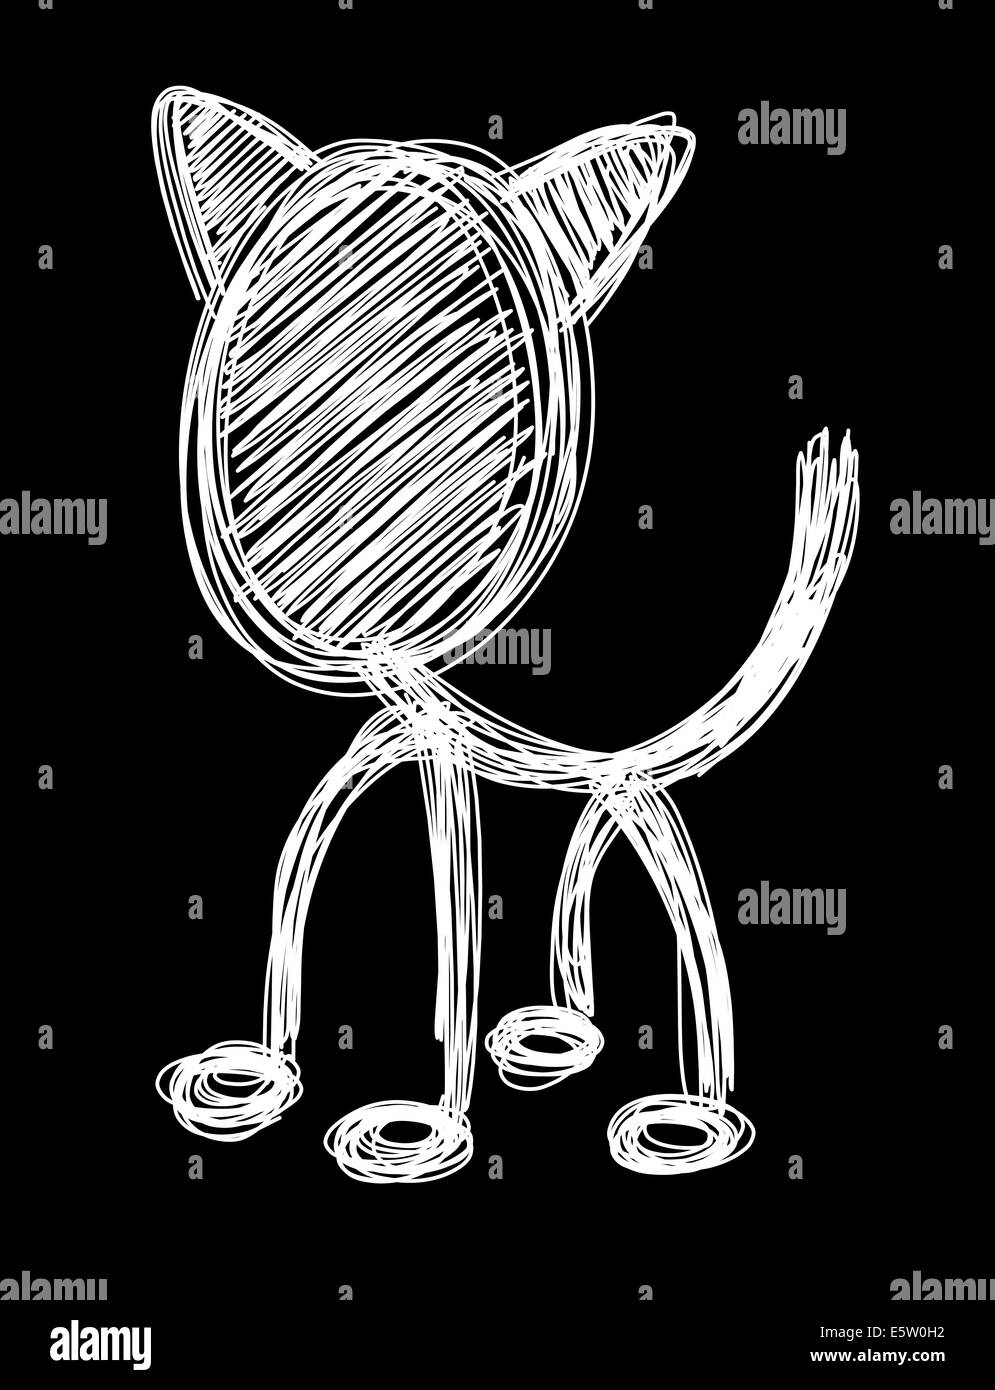 Illustration of a cat on a chalk board Stock Photo